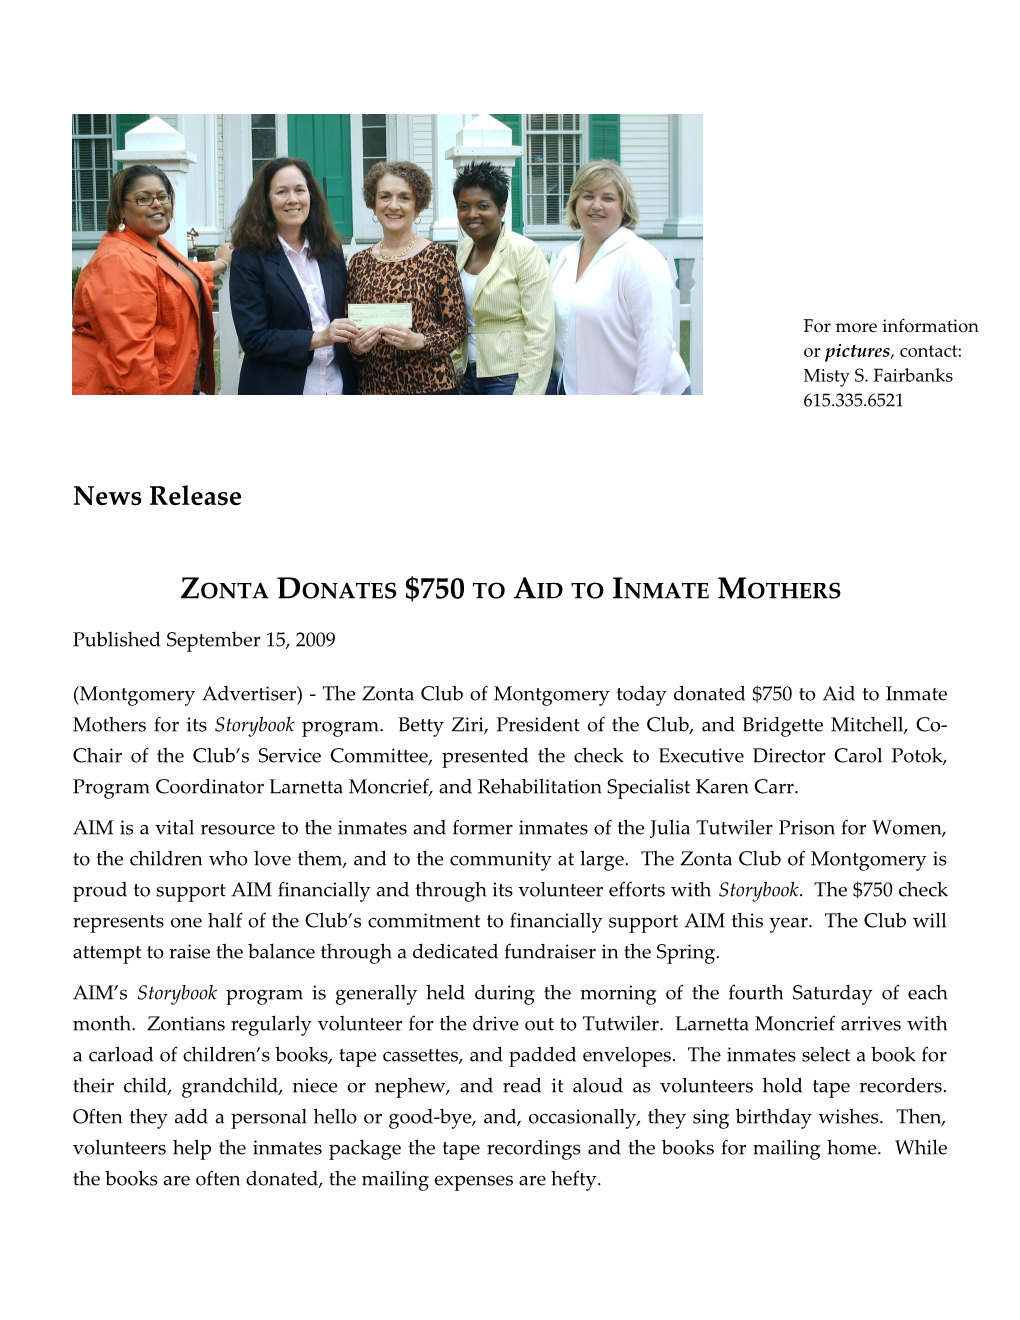 Zonta Donates $750 to Aid to Inmate Mothers